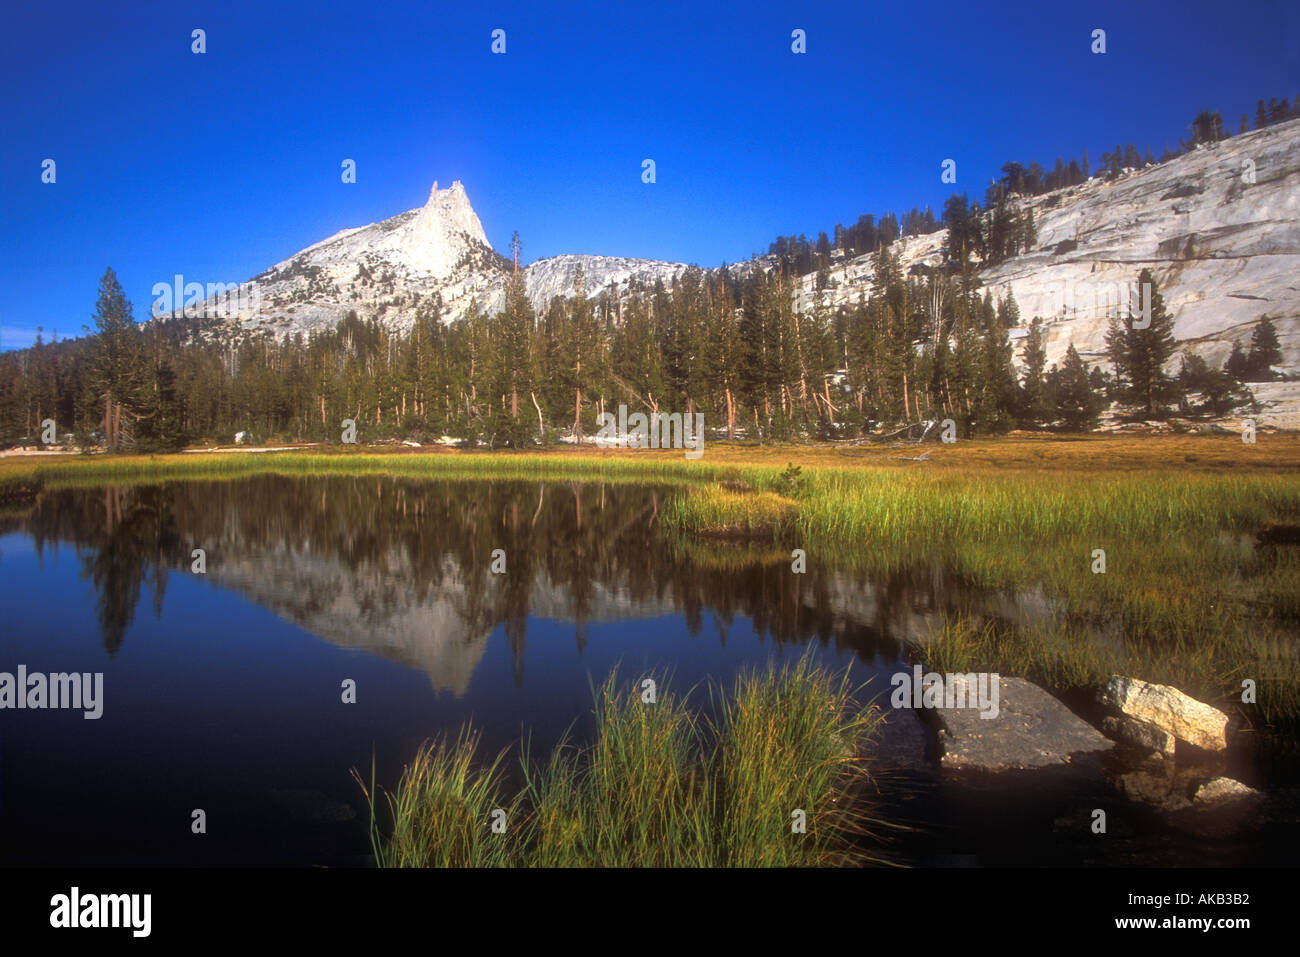 Cathédrale Lake High Sierra Yosemite National Park California USA United States of America North Banque D'Images